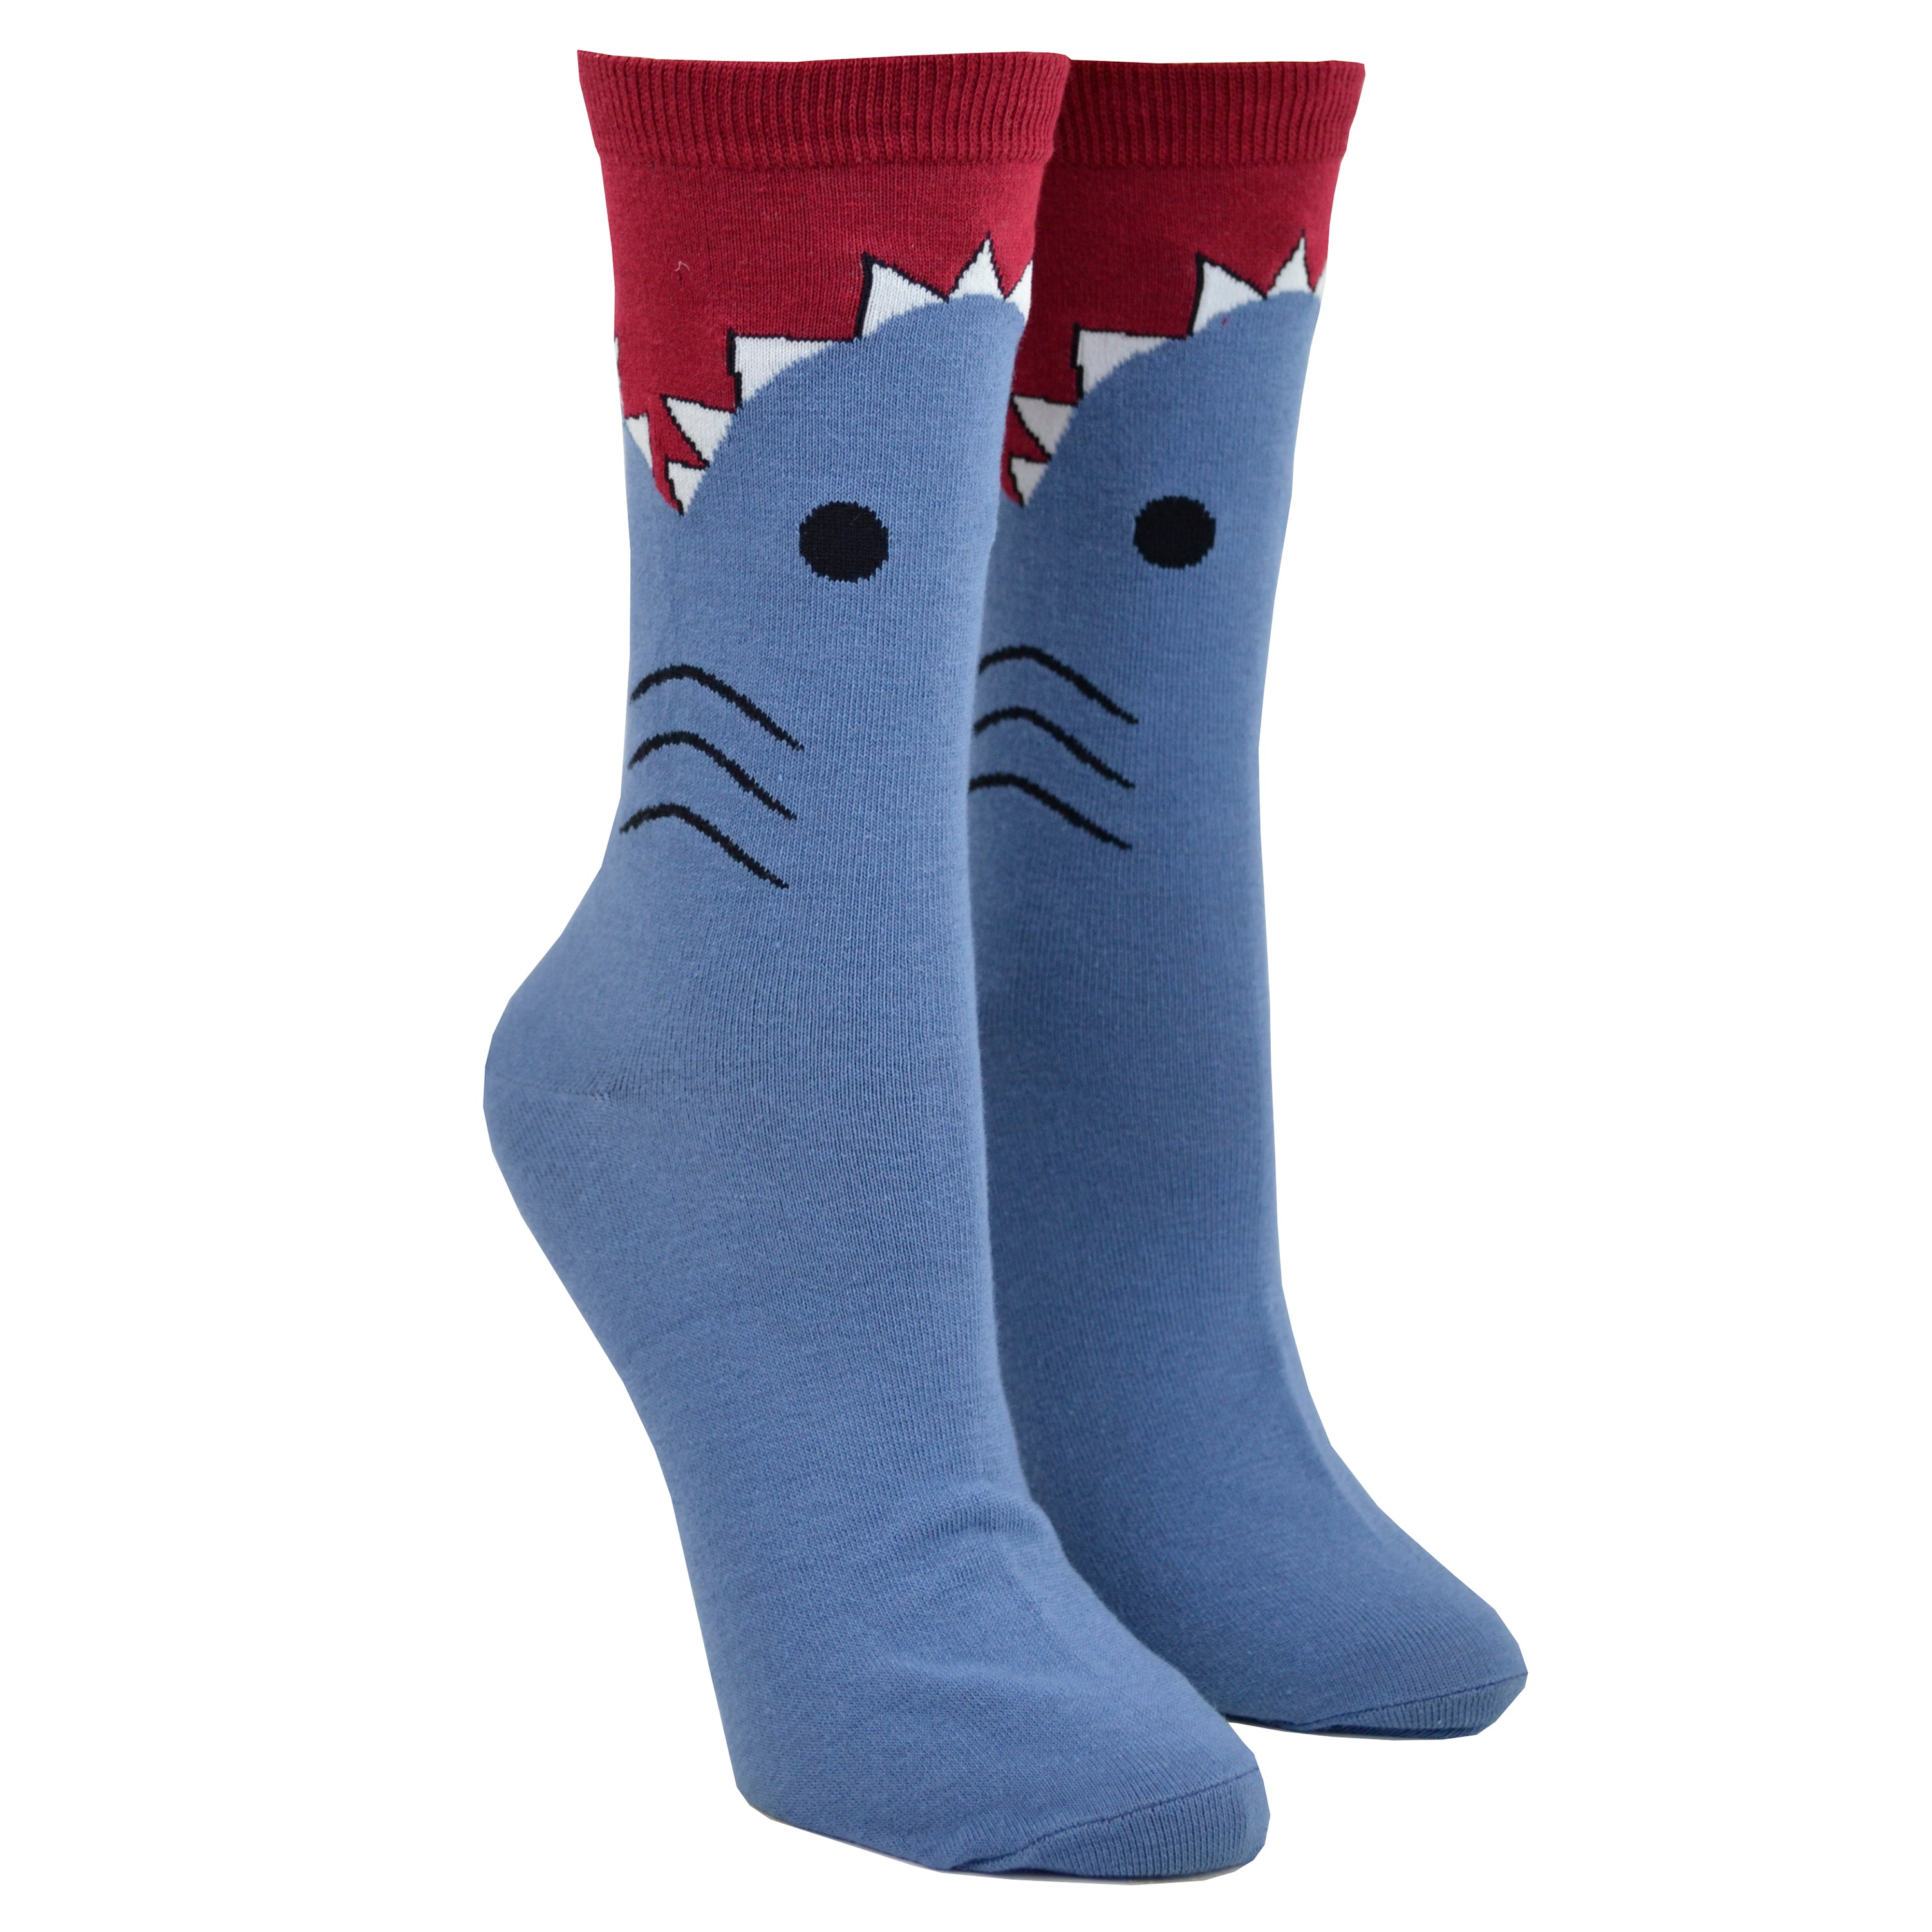 Shown on a leg form, these blue cotton women's novelty crew socks with a red top and cuff by the brand K Bell make it look like a shark is eating your leg, showing the sharks gills, eyes and teeth chomping on your calf.